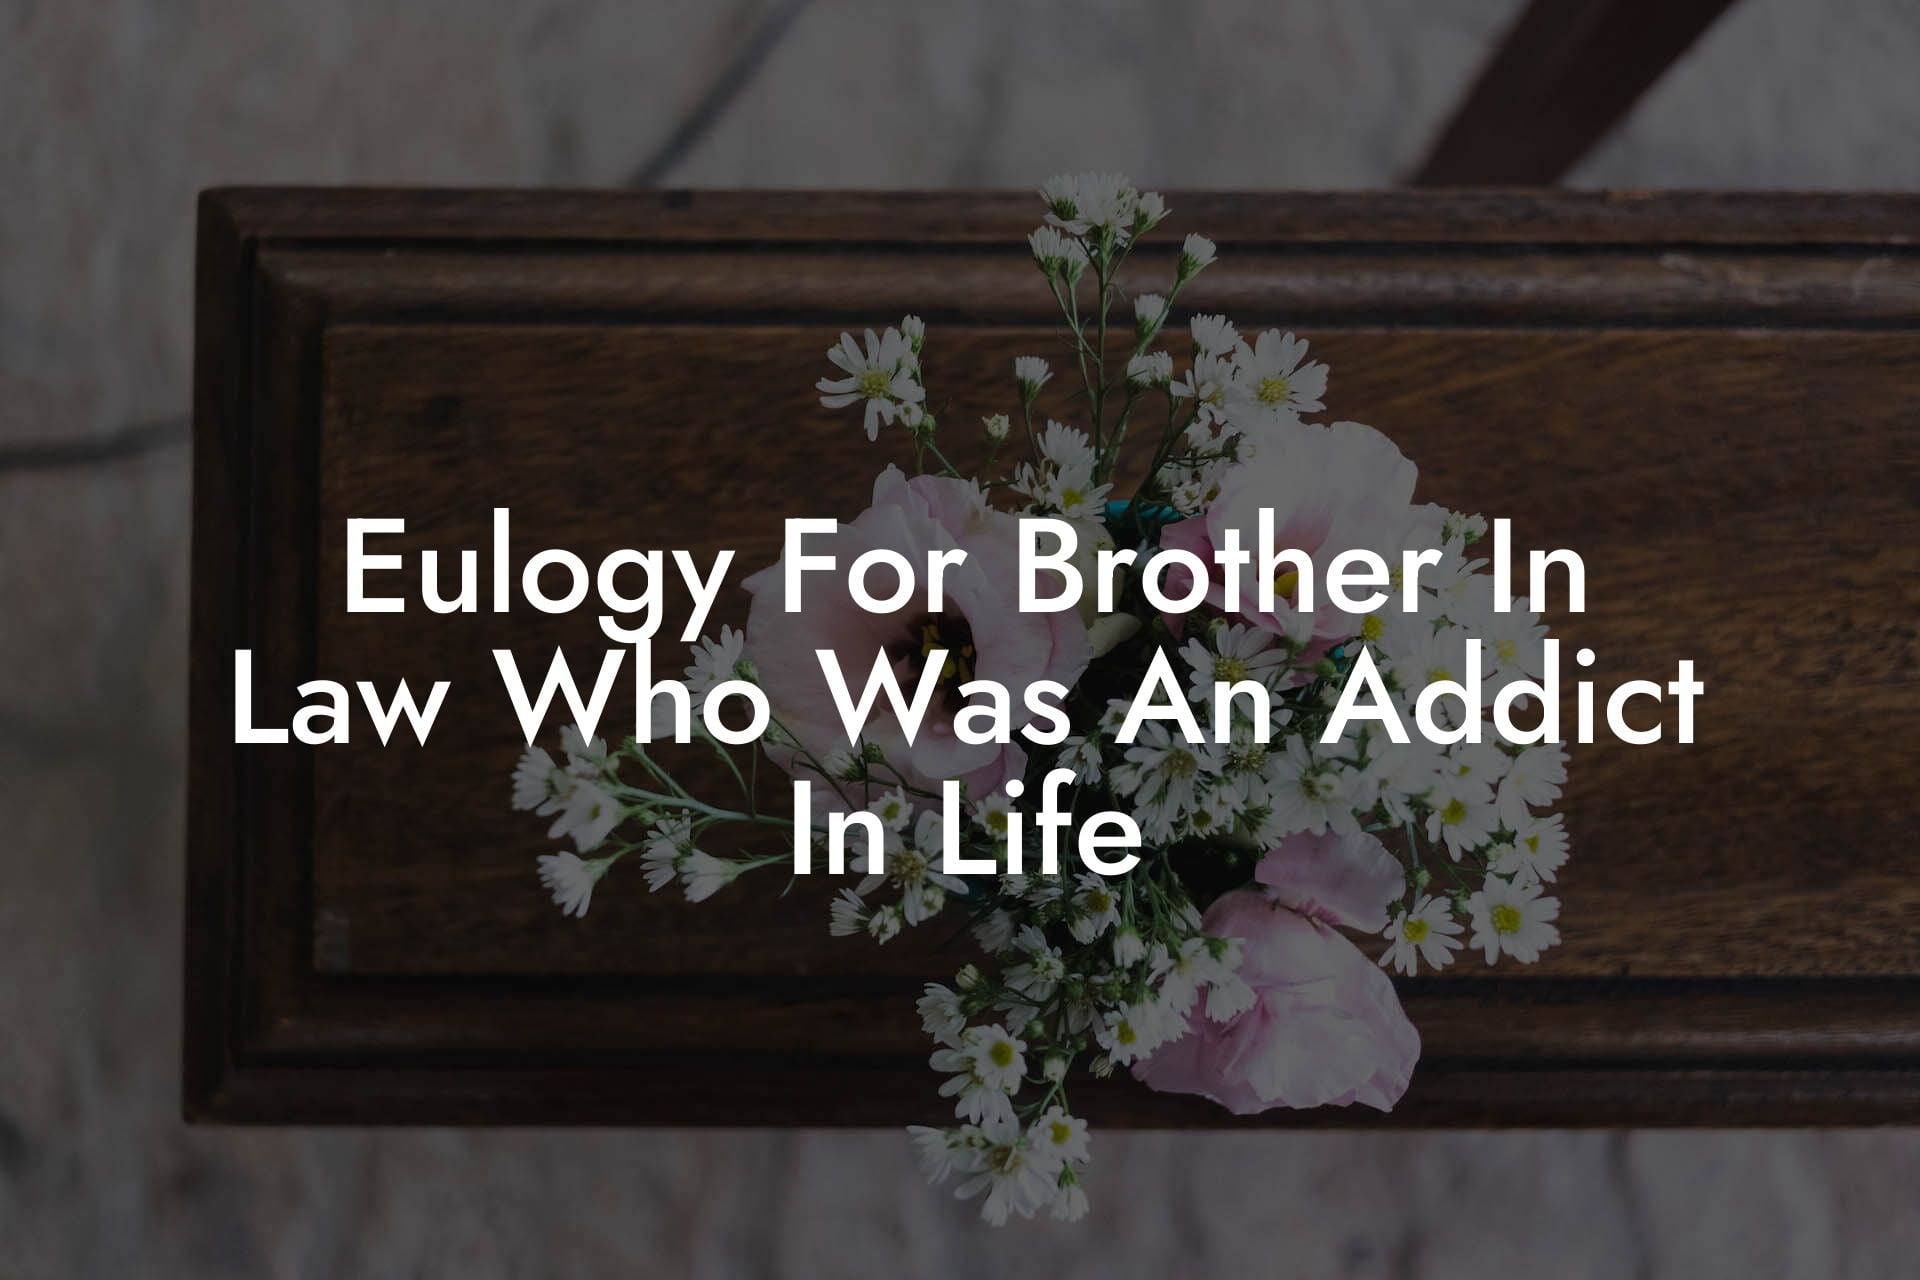 Eulogy For Brother In Law Who Was An Addict In Life